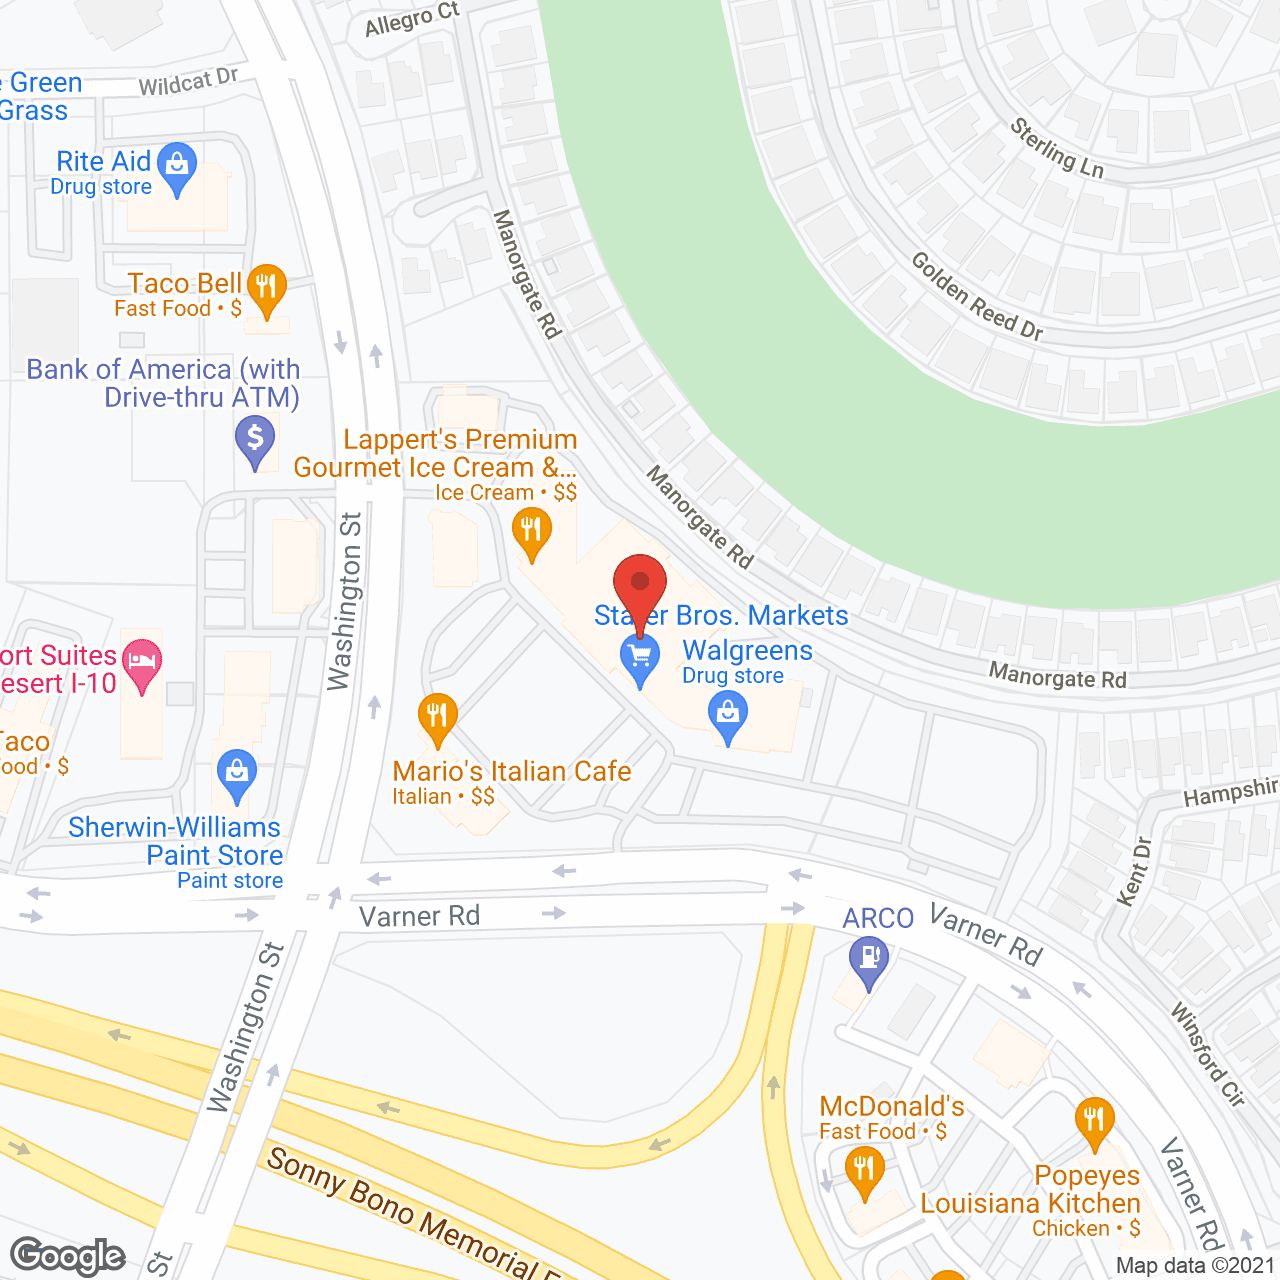 Affordable Companion Care Inc. in google map